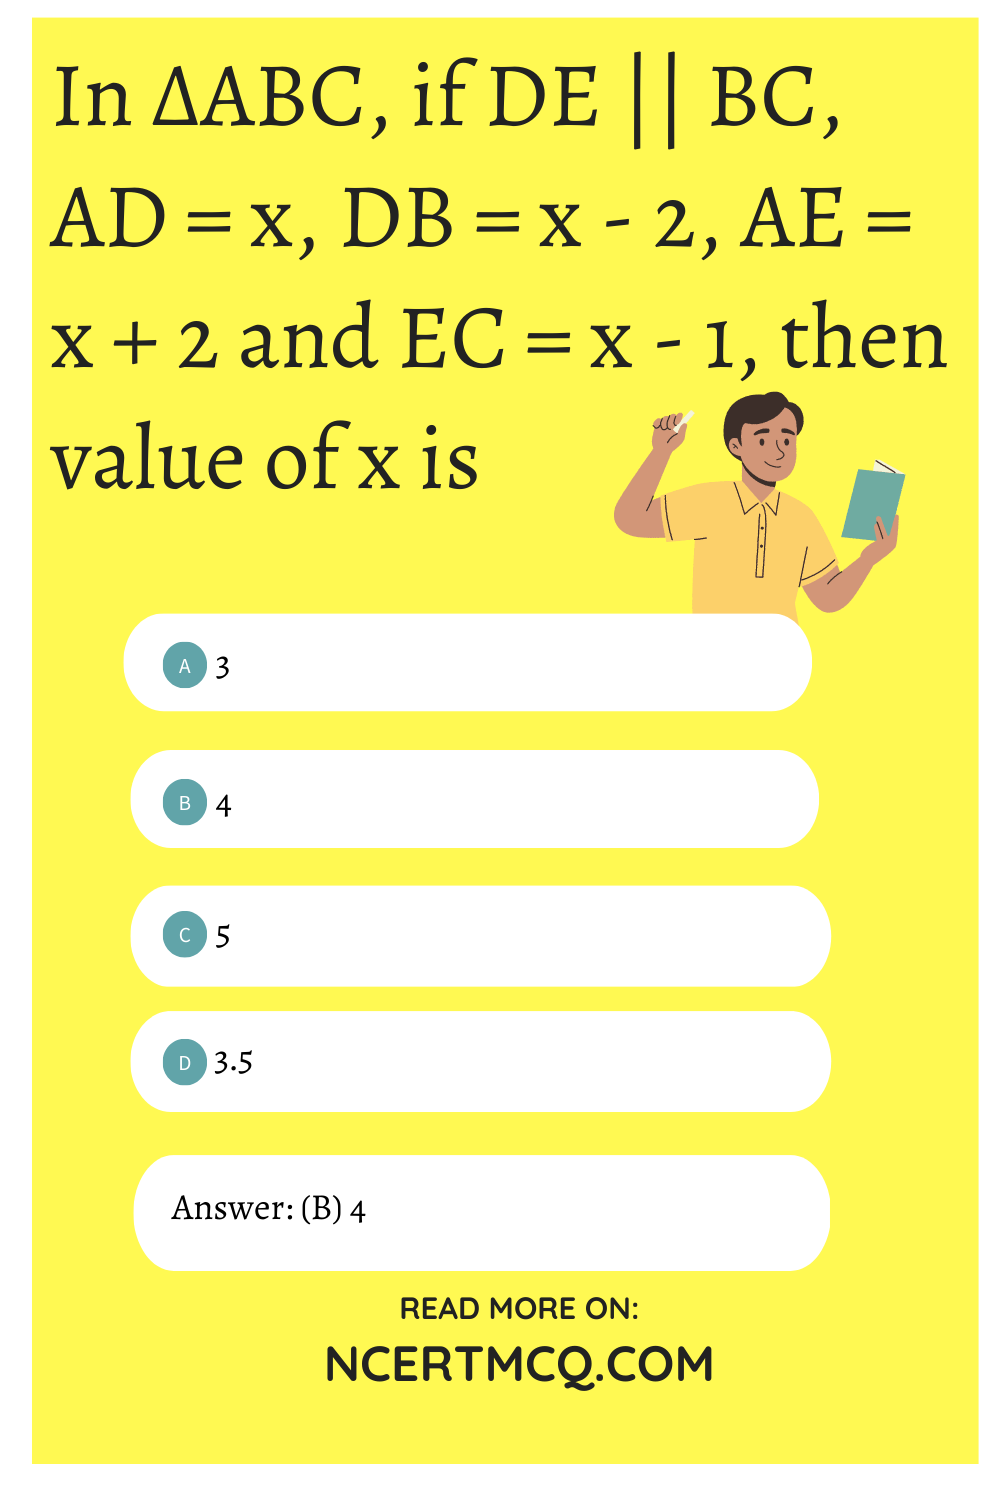 In ΔABC, if DE || BC, AD = x, DB = x - 2, AE = x + 2 and EC = x - 1, then value of x is